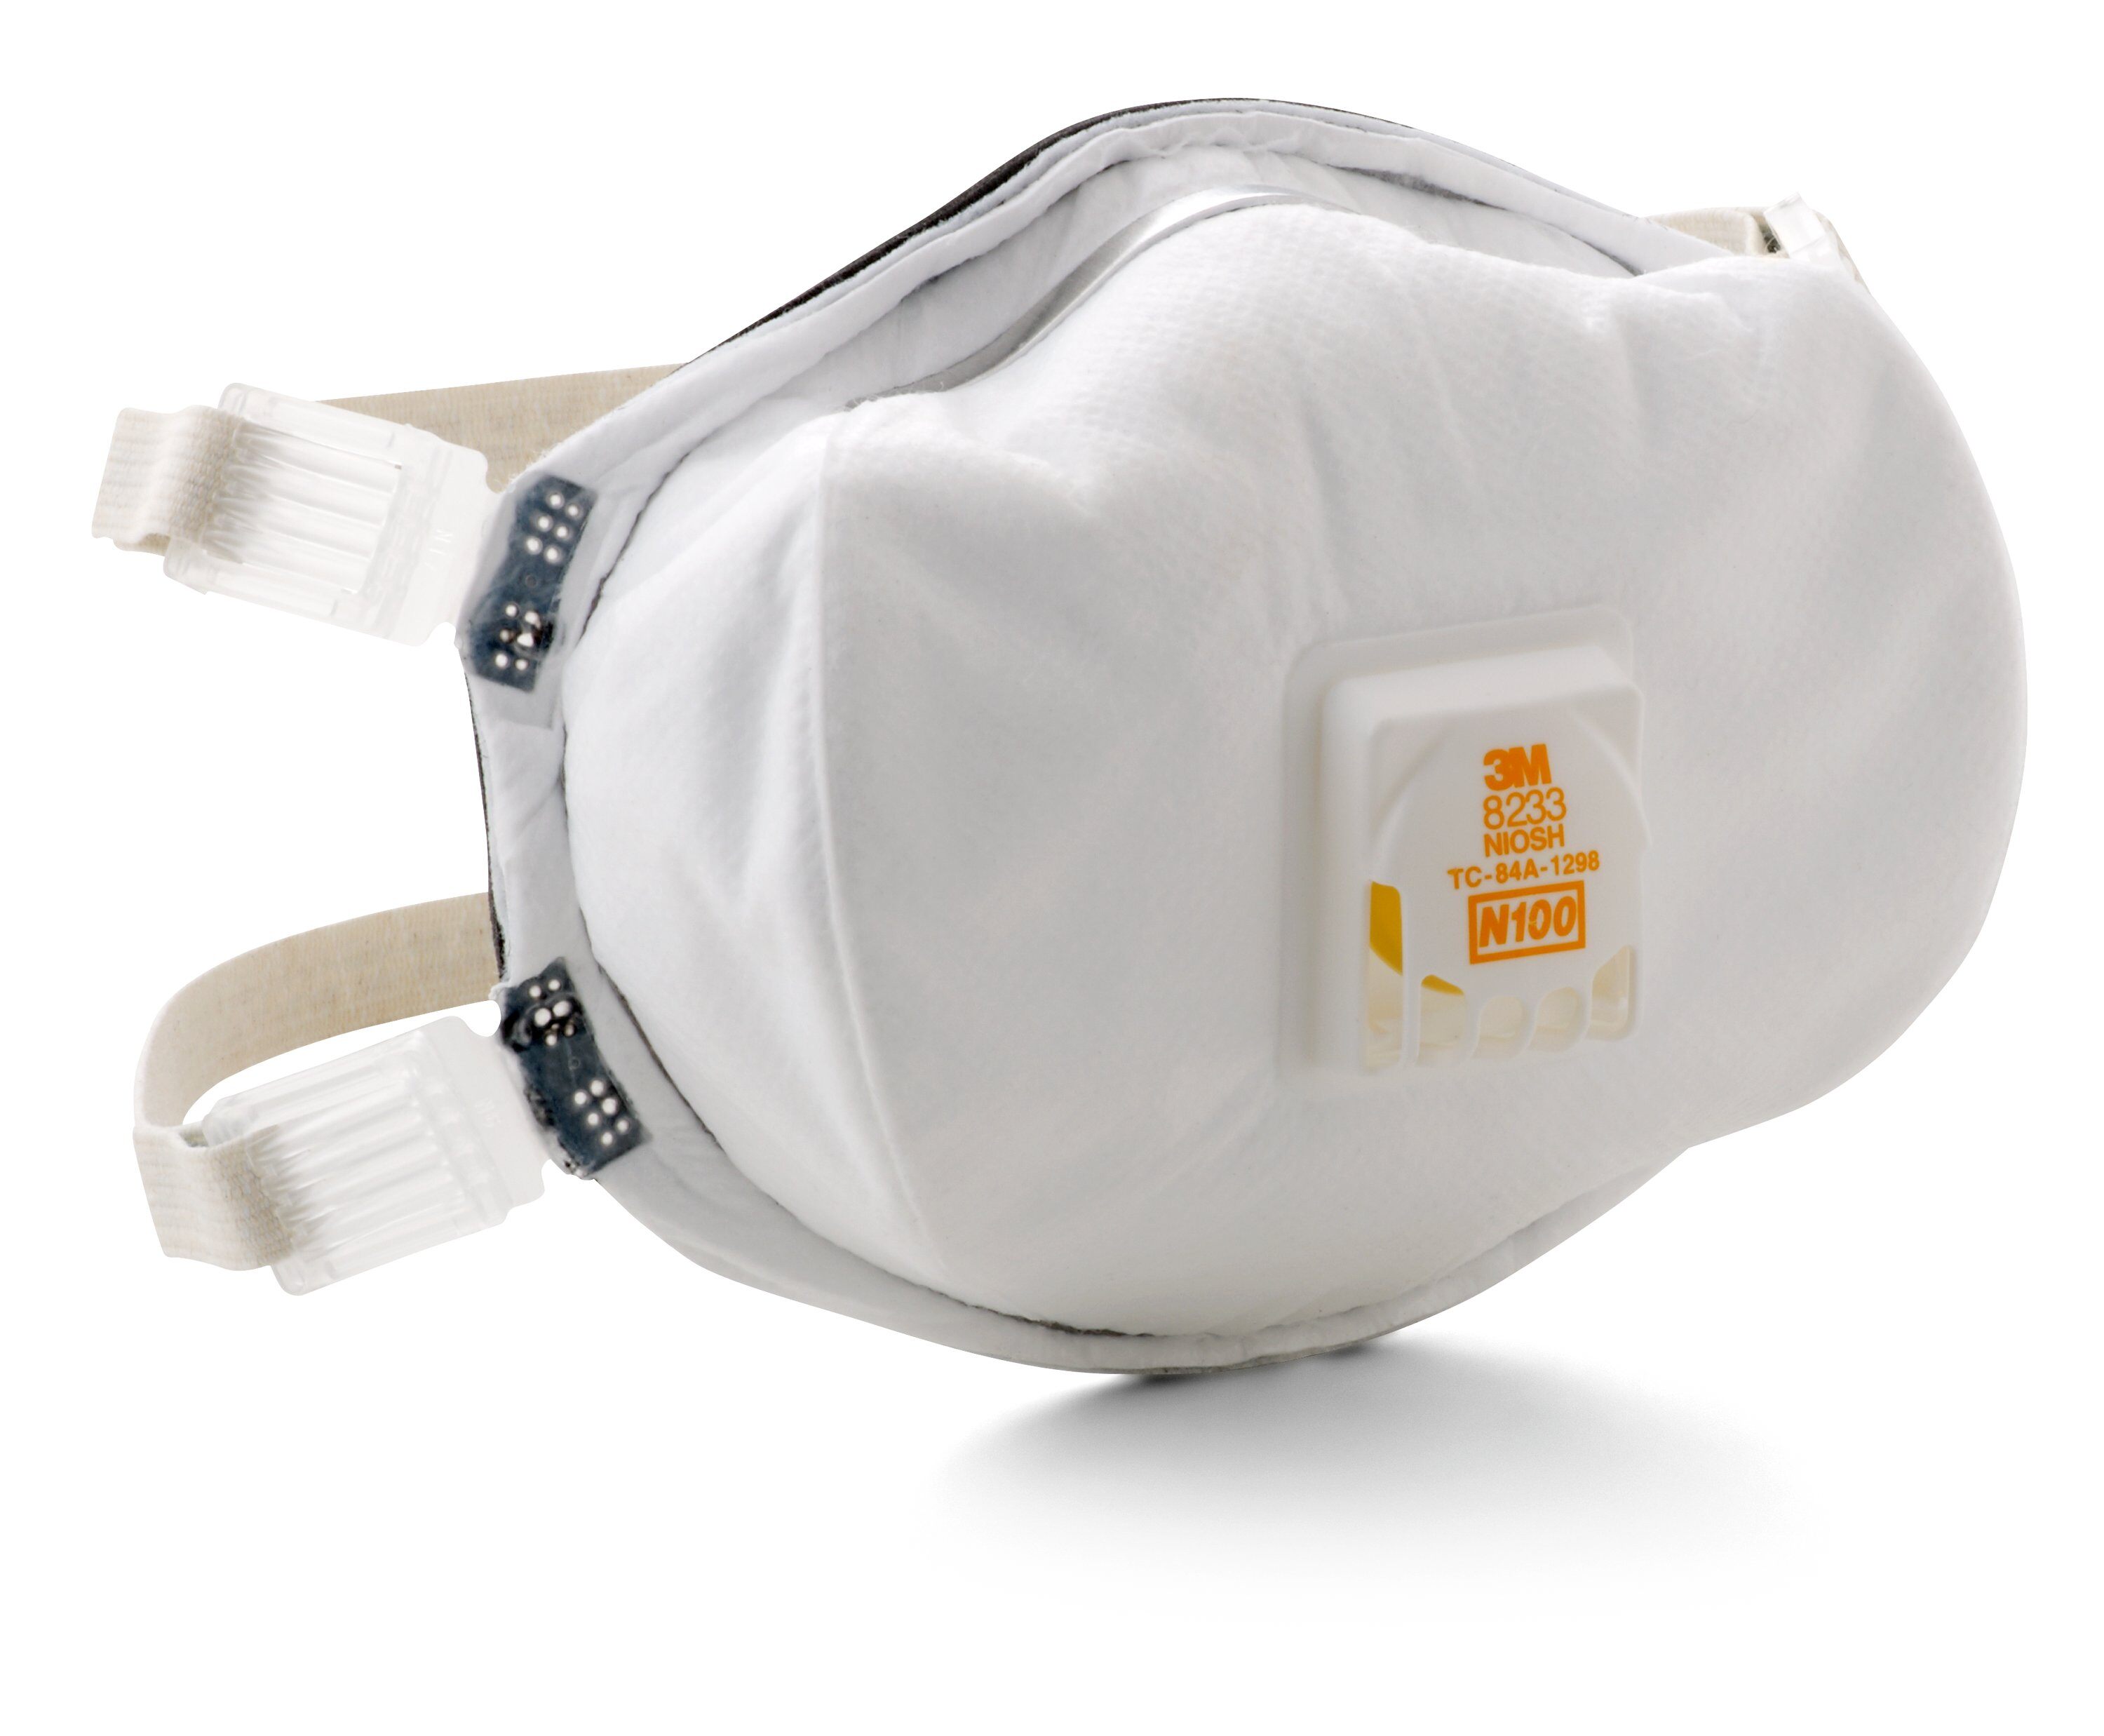 3M™ 8233 Standard Particulate Respirator, Resists: Non-Oil Based Particles